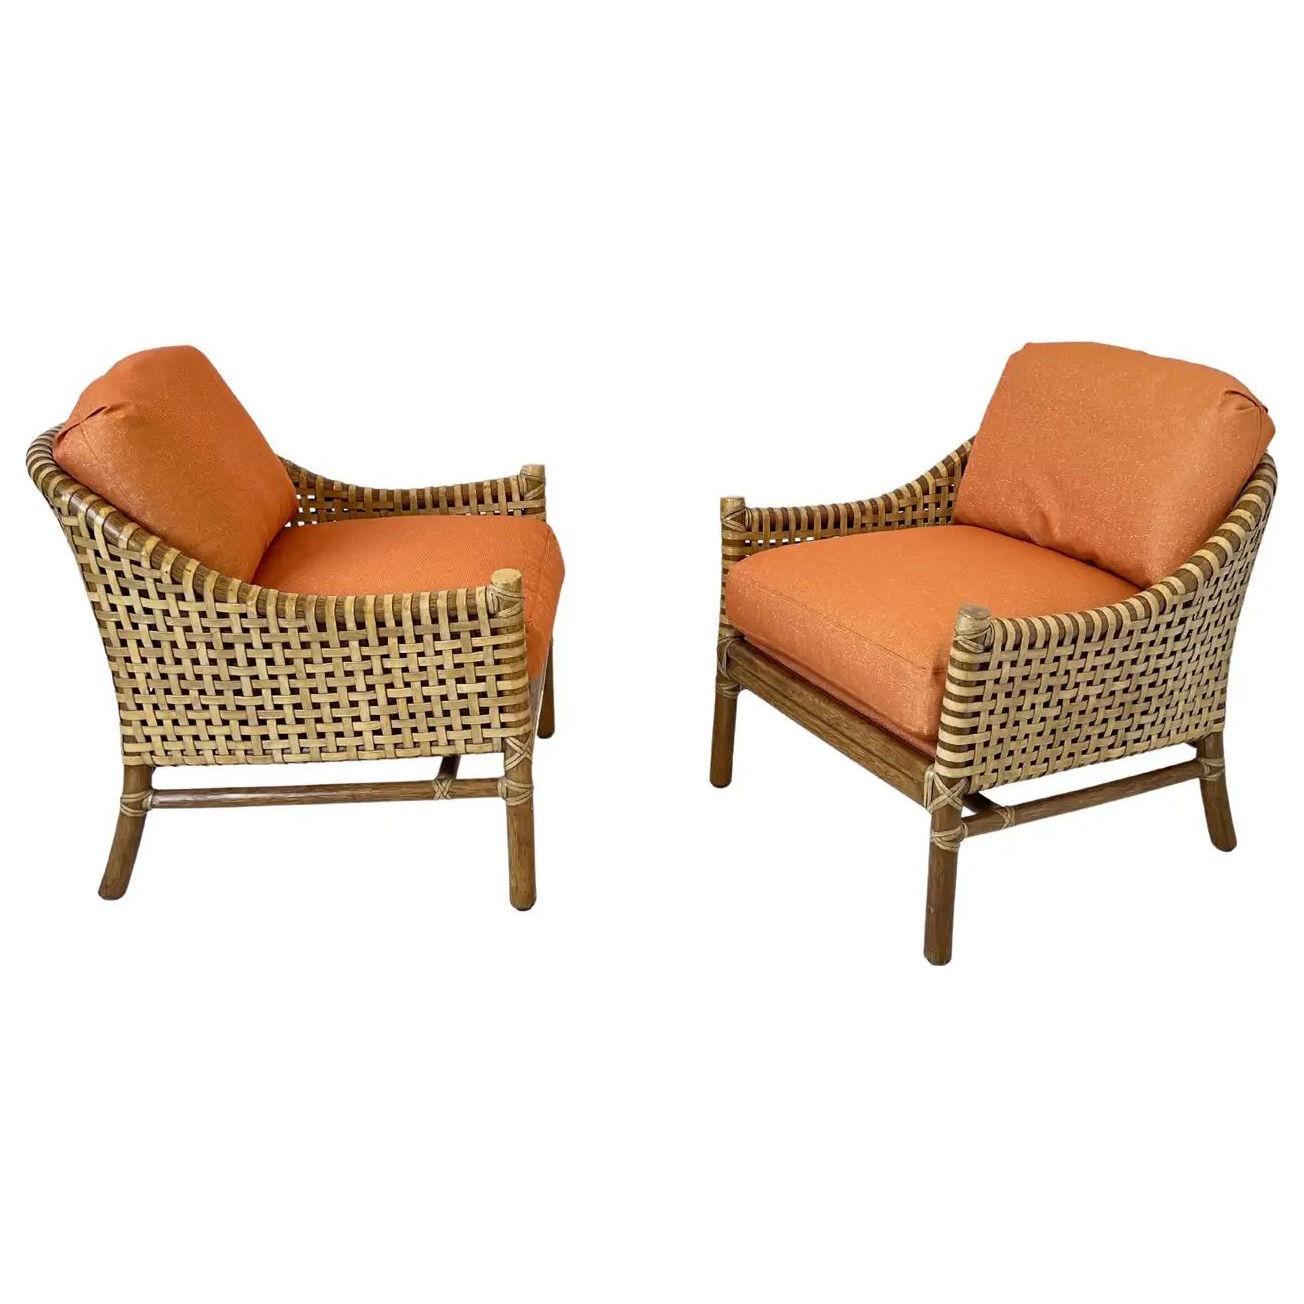 Pair of Orange Rattan Bamboo and Rawhide Lounge Chairs by McGuire